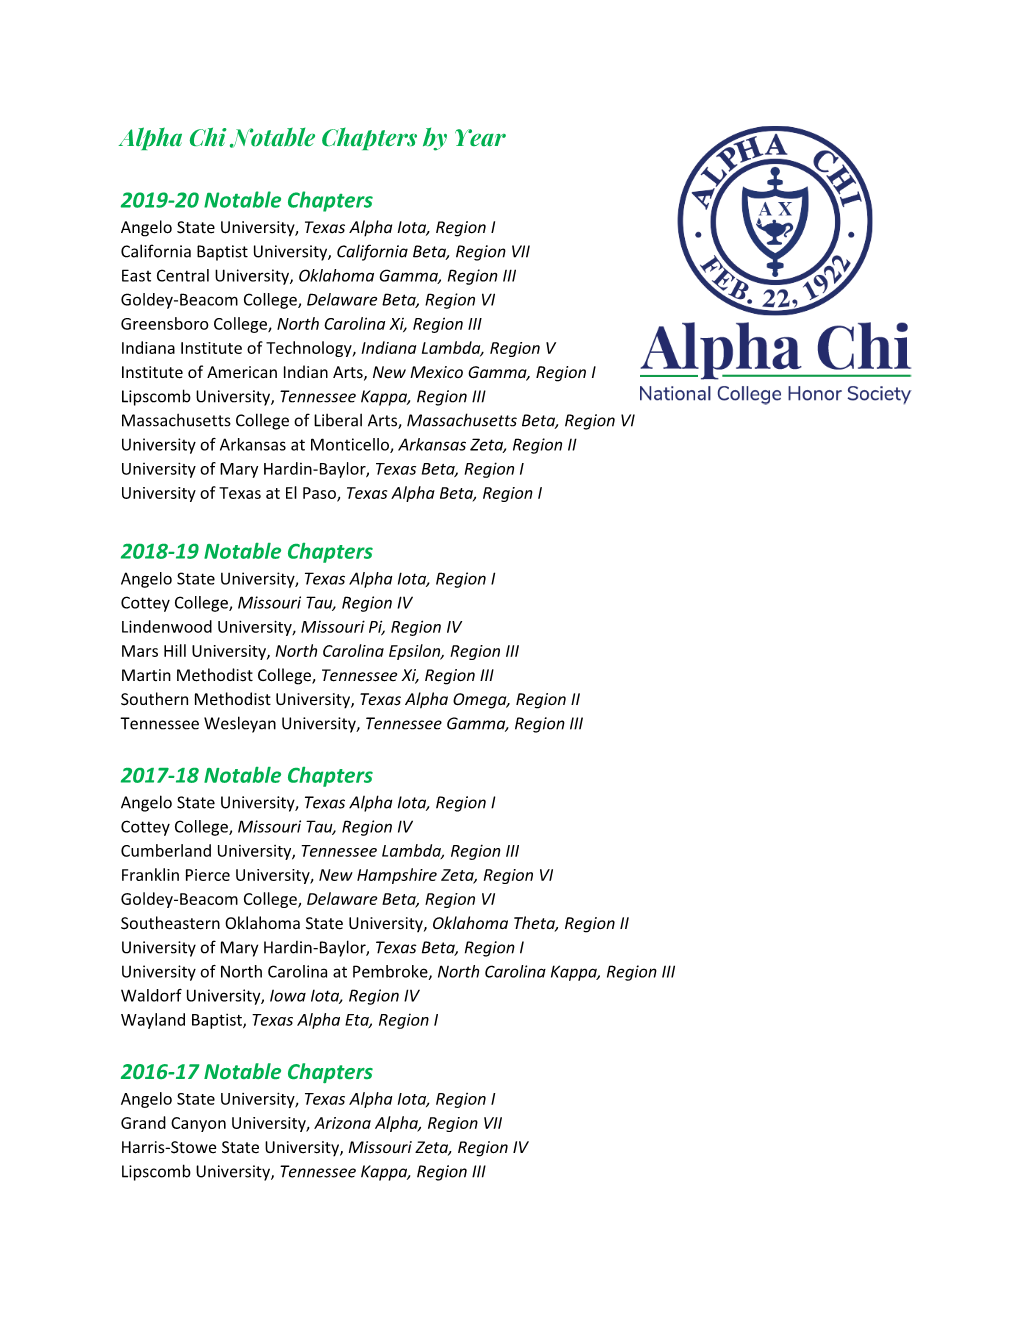 A Complete List of Notable Chapters by Award Year Is Available